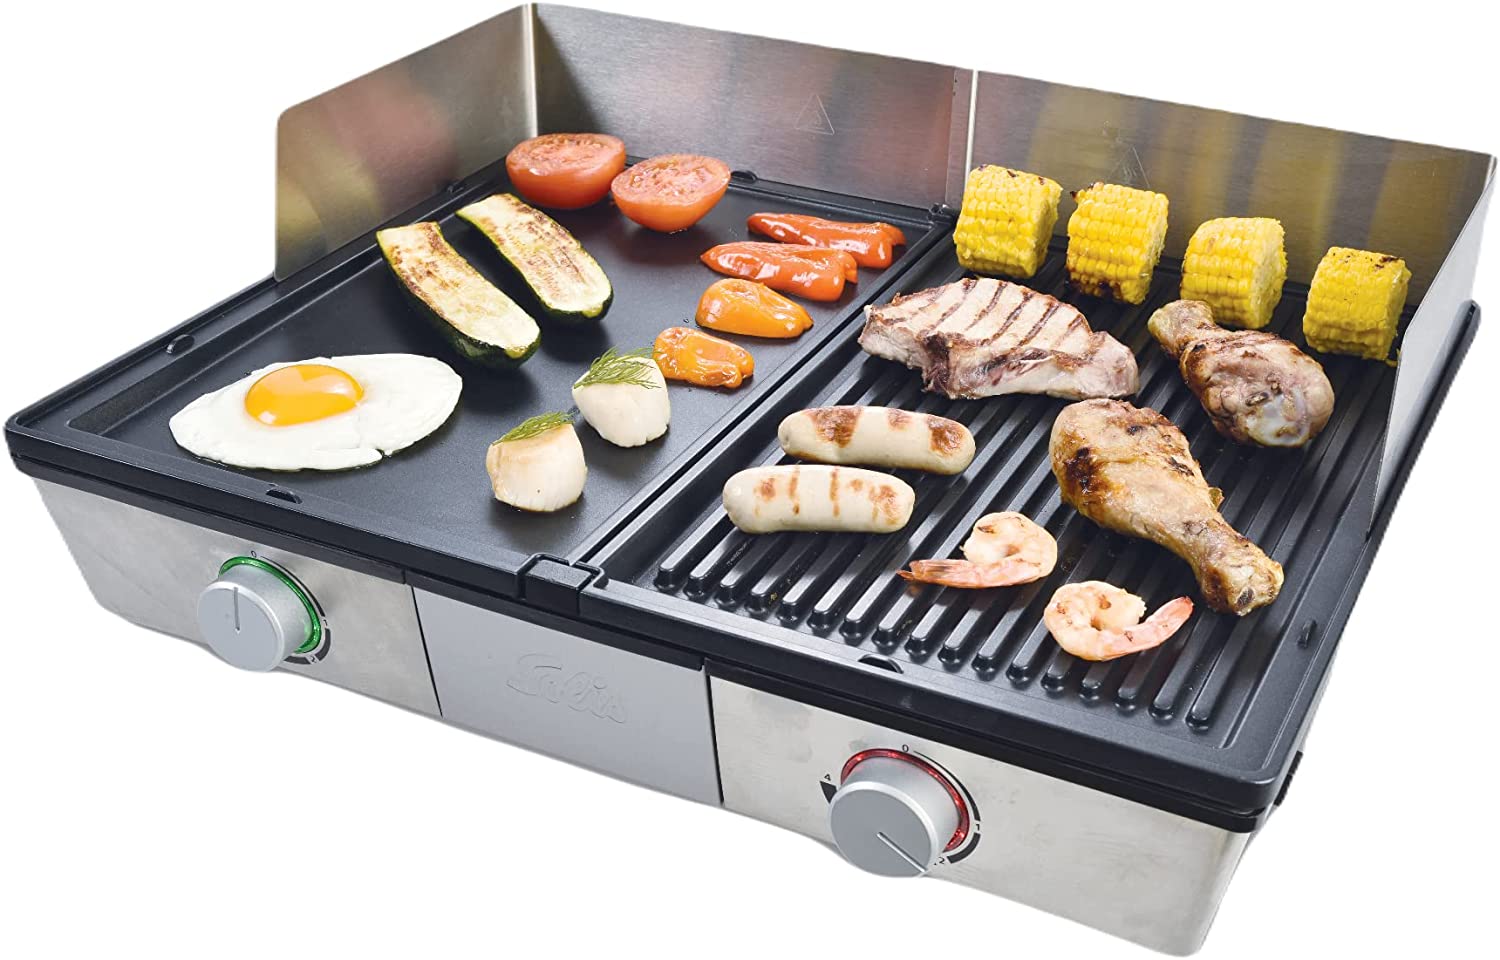 Solis 979.45 Deli Grill Stainless Steel, Stainless Steel